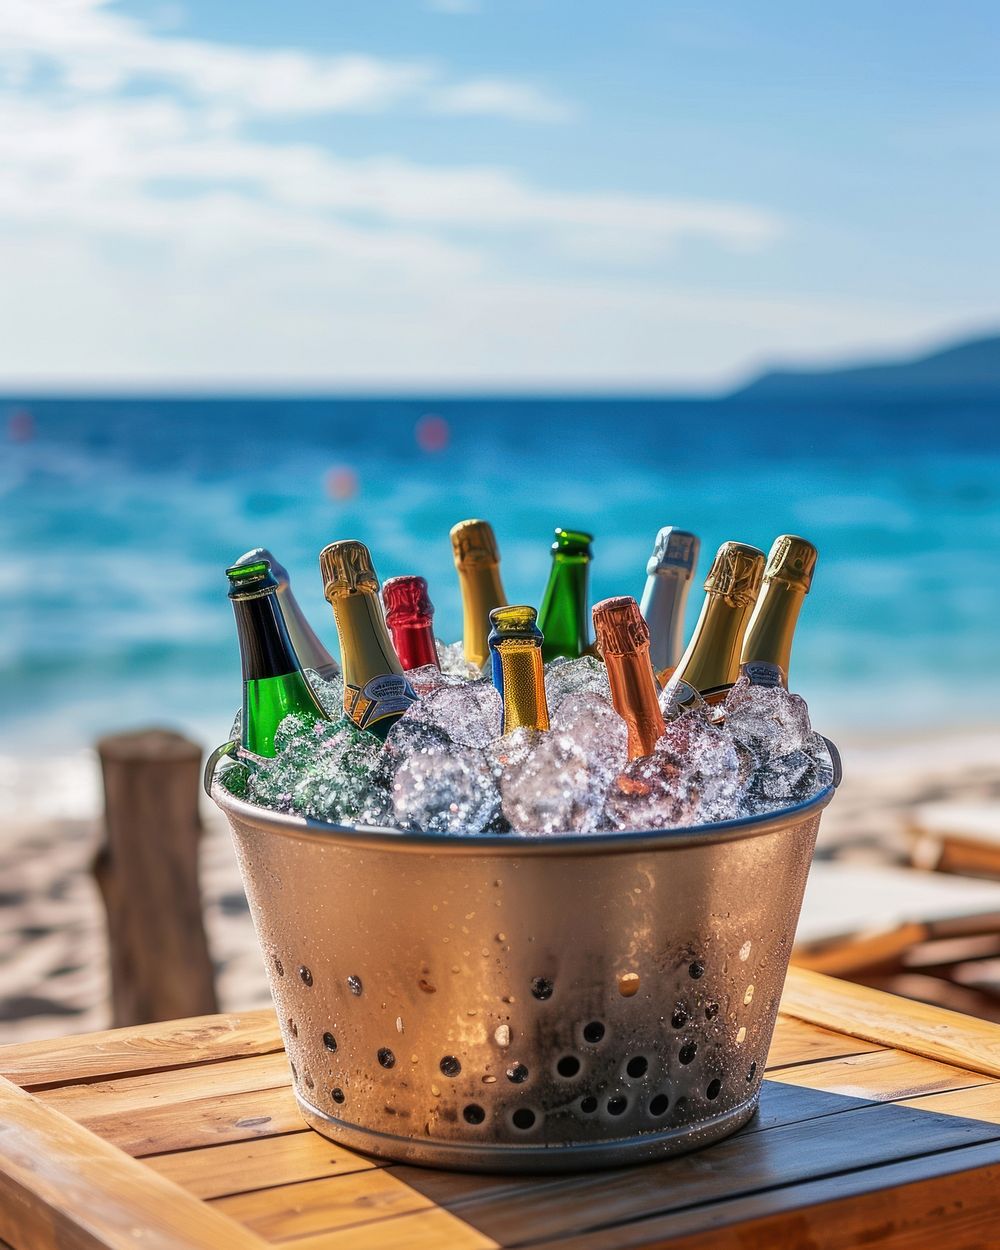 Assorted sparking wine bottles in a metal bucket full of ice put on wood table against beach view outdoors vacation summer.